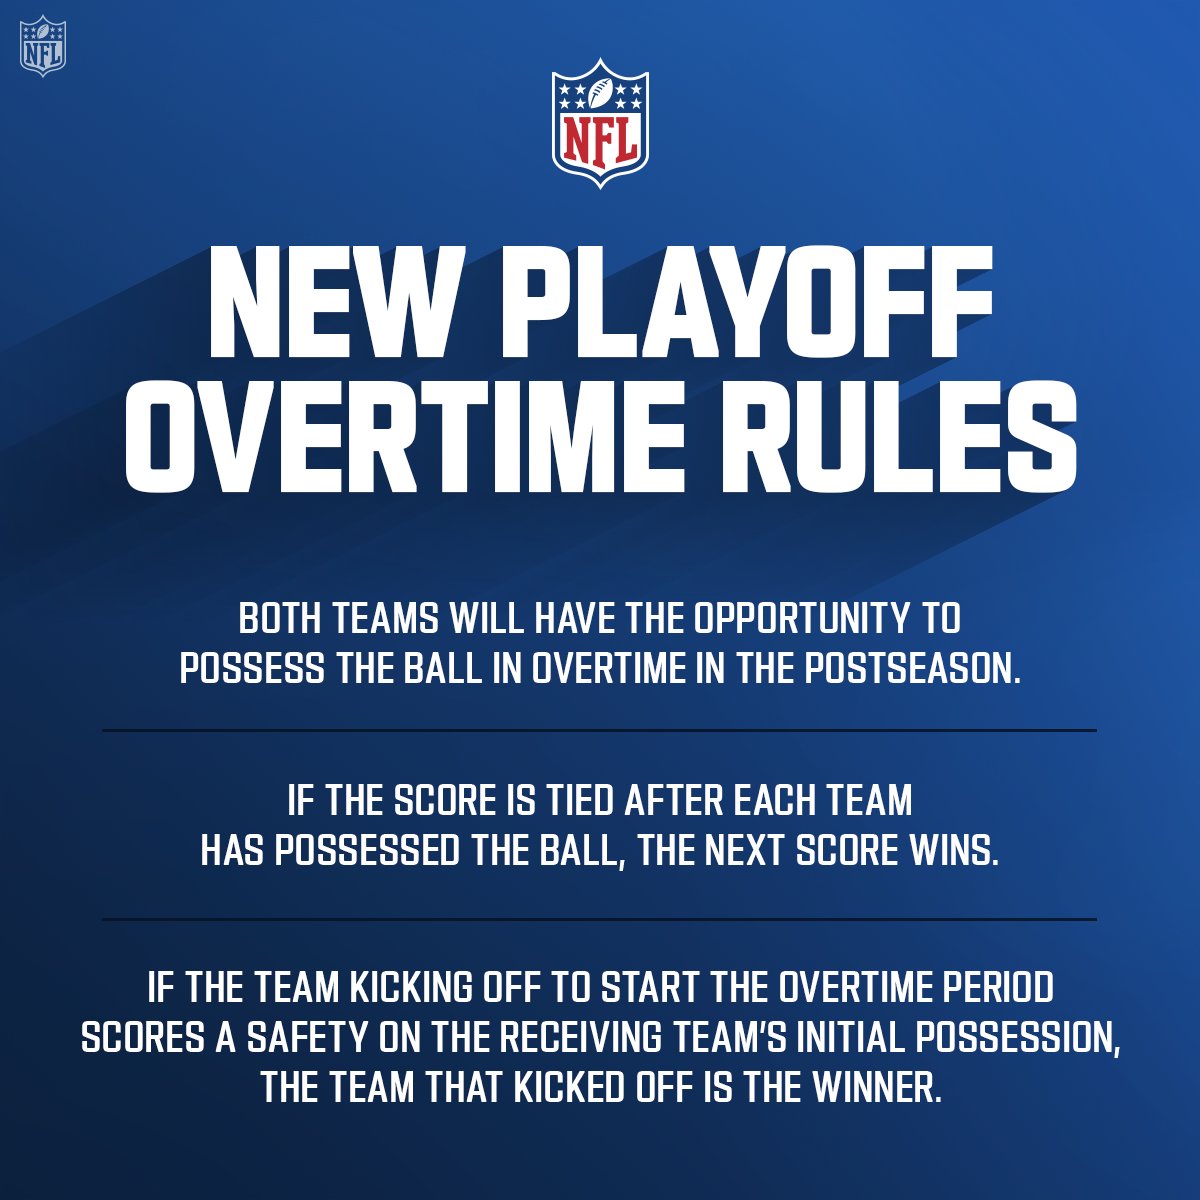 🚨 NEW PLAYOFF OVERTIME RULES 🚨